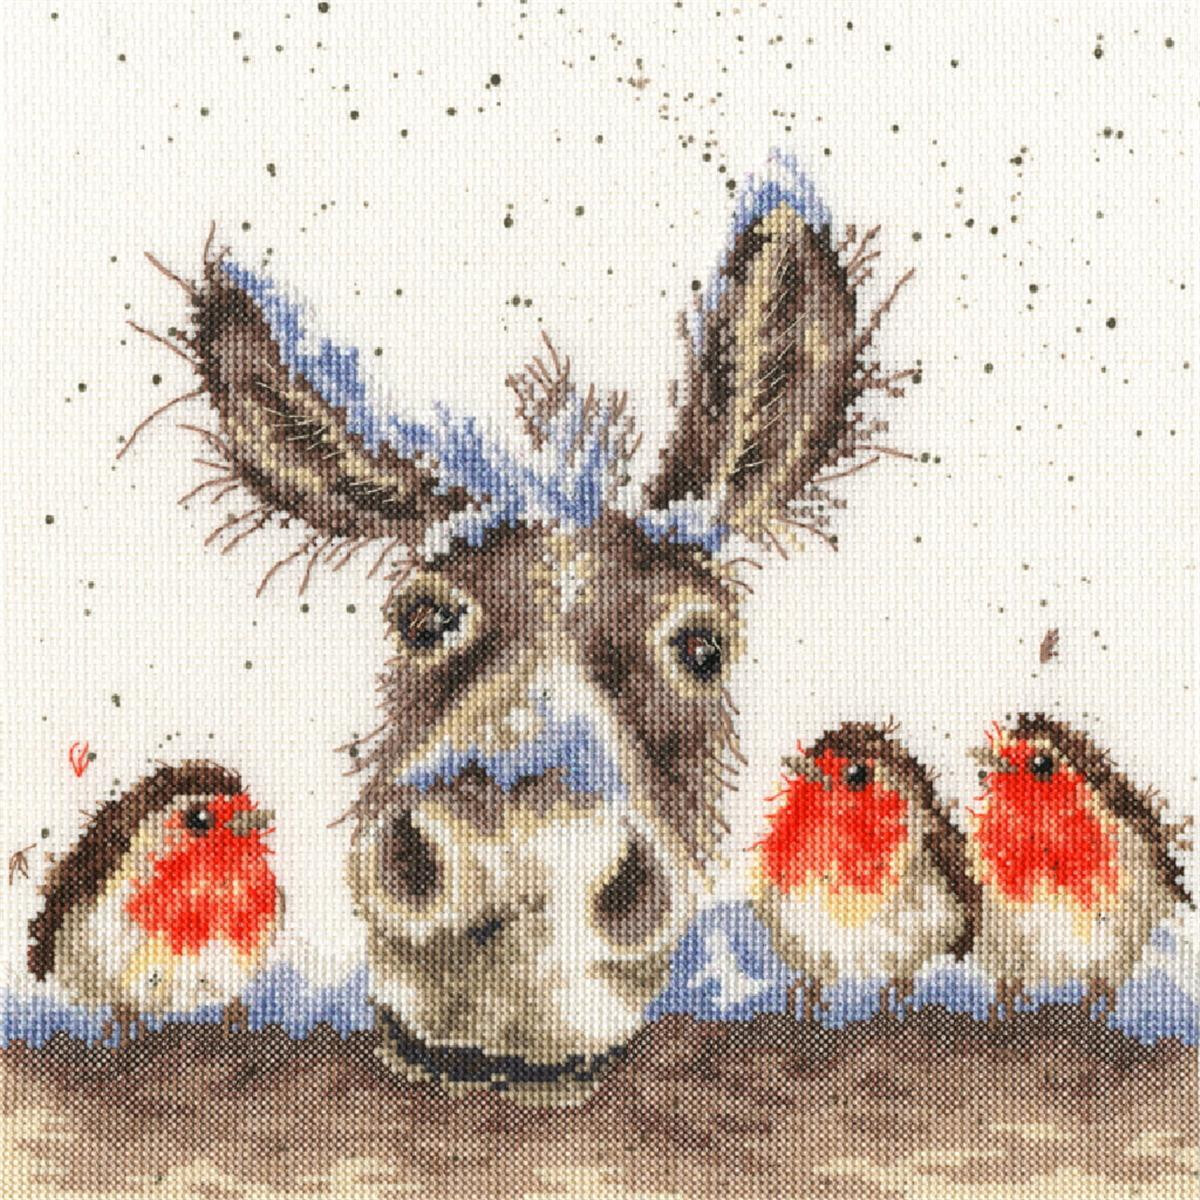 A cross stitch picture or embroidery pack from Bothy...